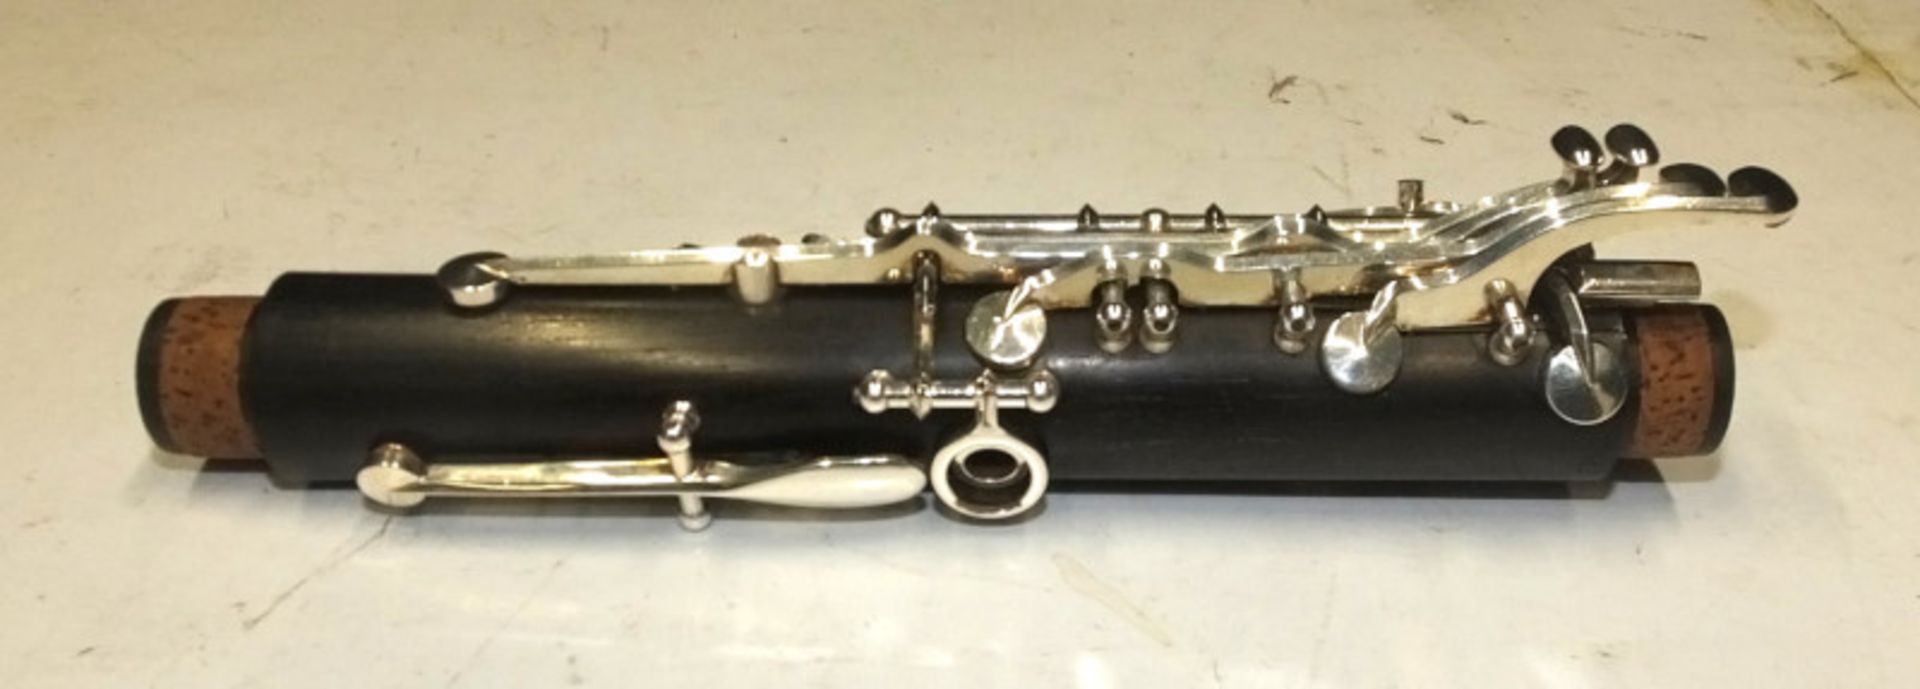 Howarth S2 Clarinet in case - Serial Number - 2153. - Image 4 of 22